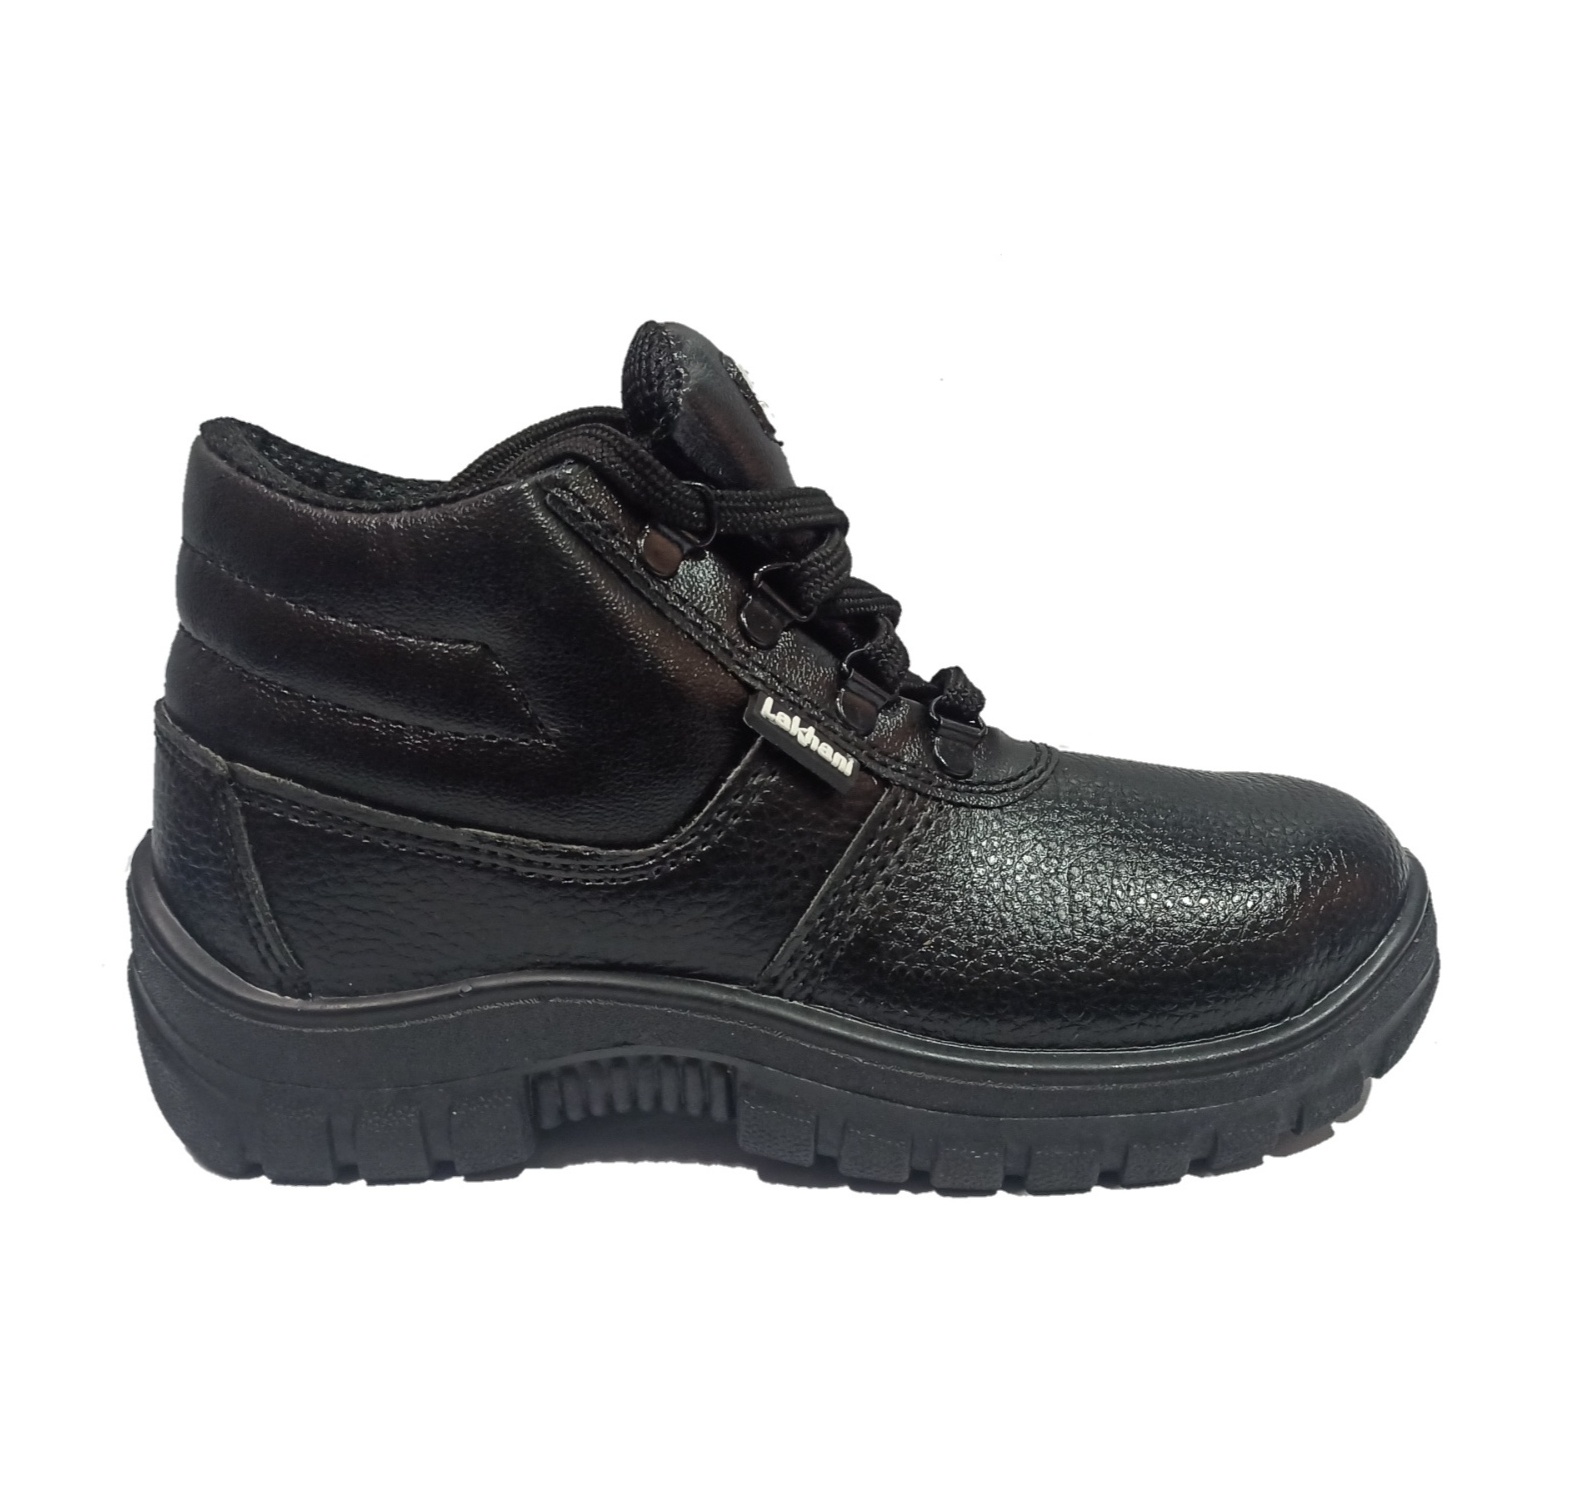 LAKHANI Safetoe Industrial Safety shoes - Nice Footwear